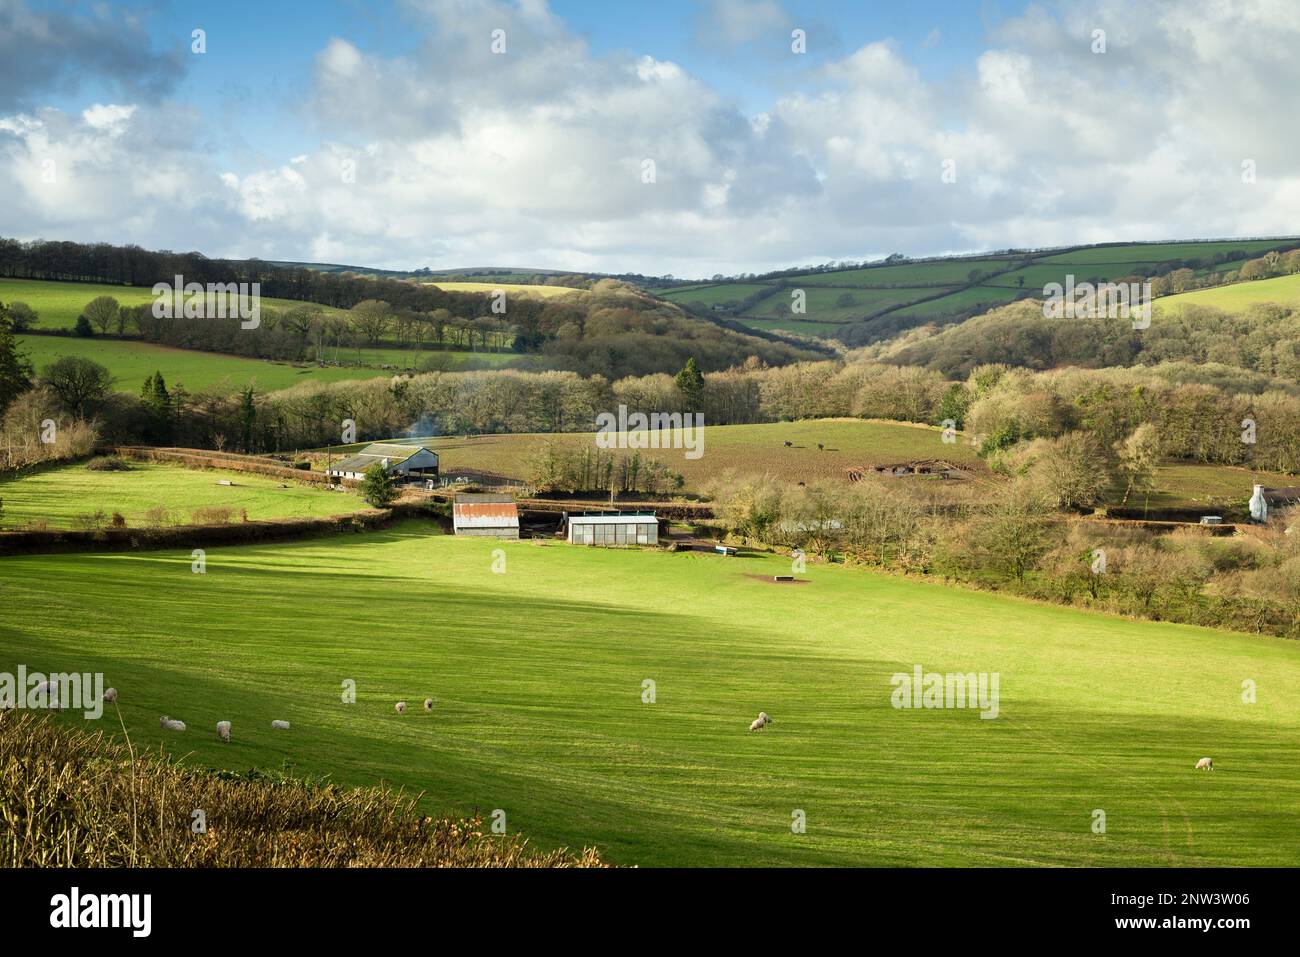 The Barle Valley near Dulverton in the Exmoor National Park, Somerset, England. Stock Photo